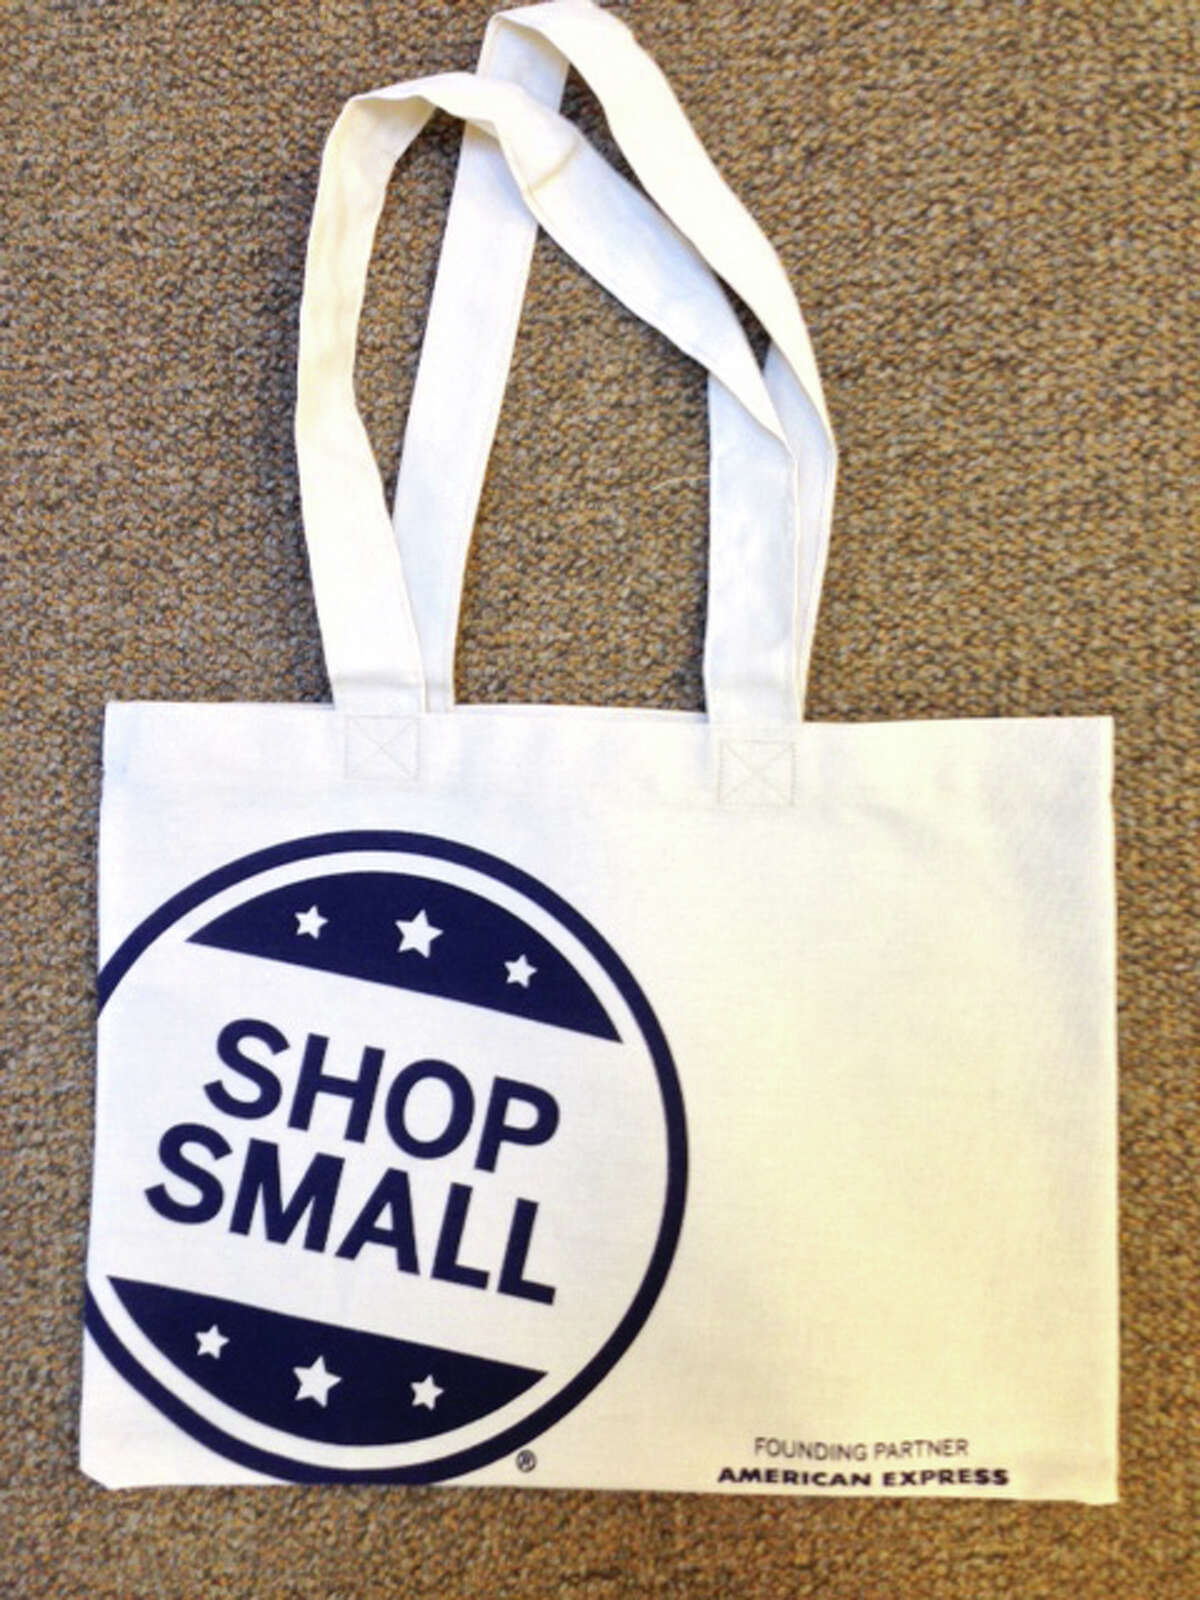 Greenwich gears up for Small Business Saturday